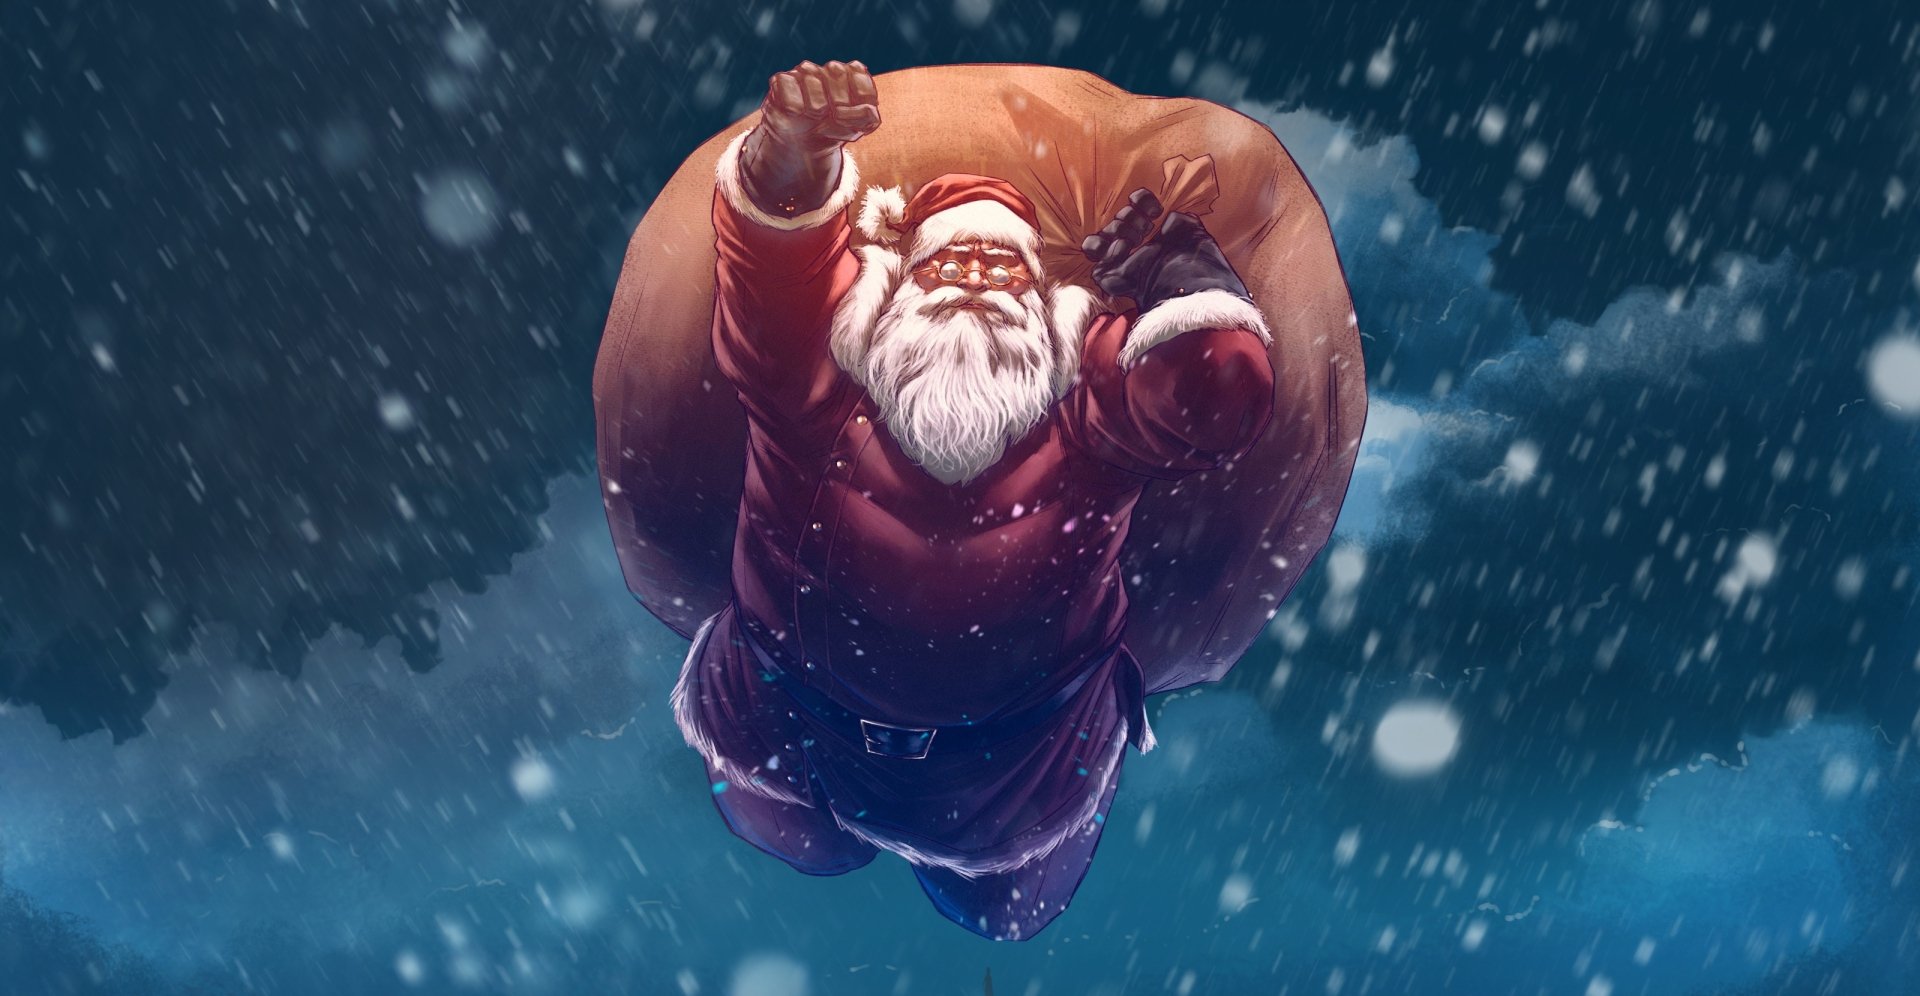 HD desktop wallpaper featuring Santa Claus joyfully holding a sack, set against a snowy, blue-toned background, celebrating the Christmas holiday spirit.